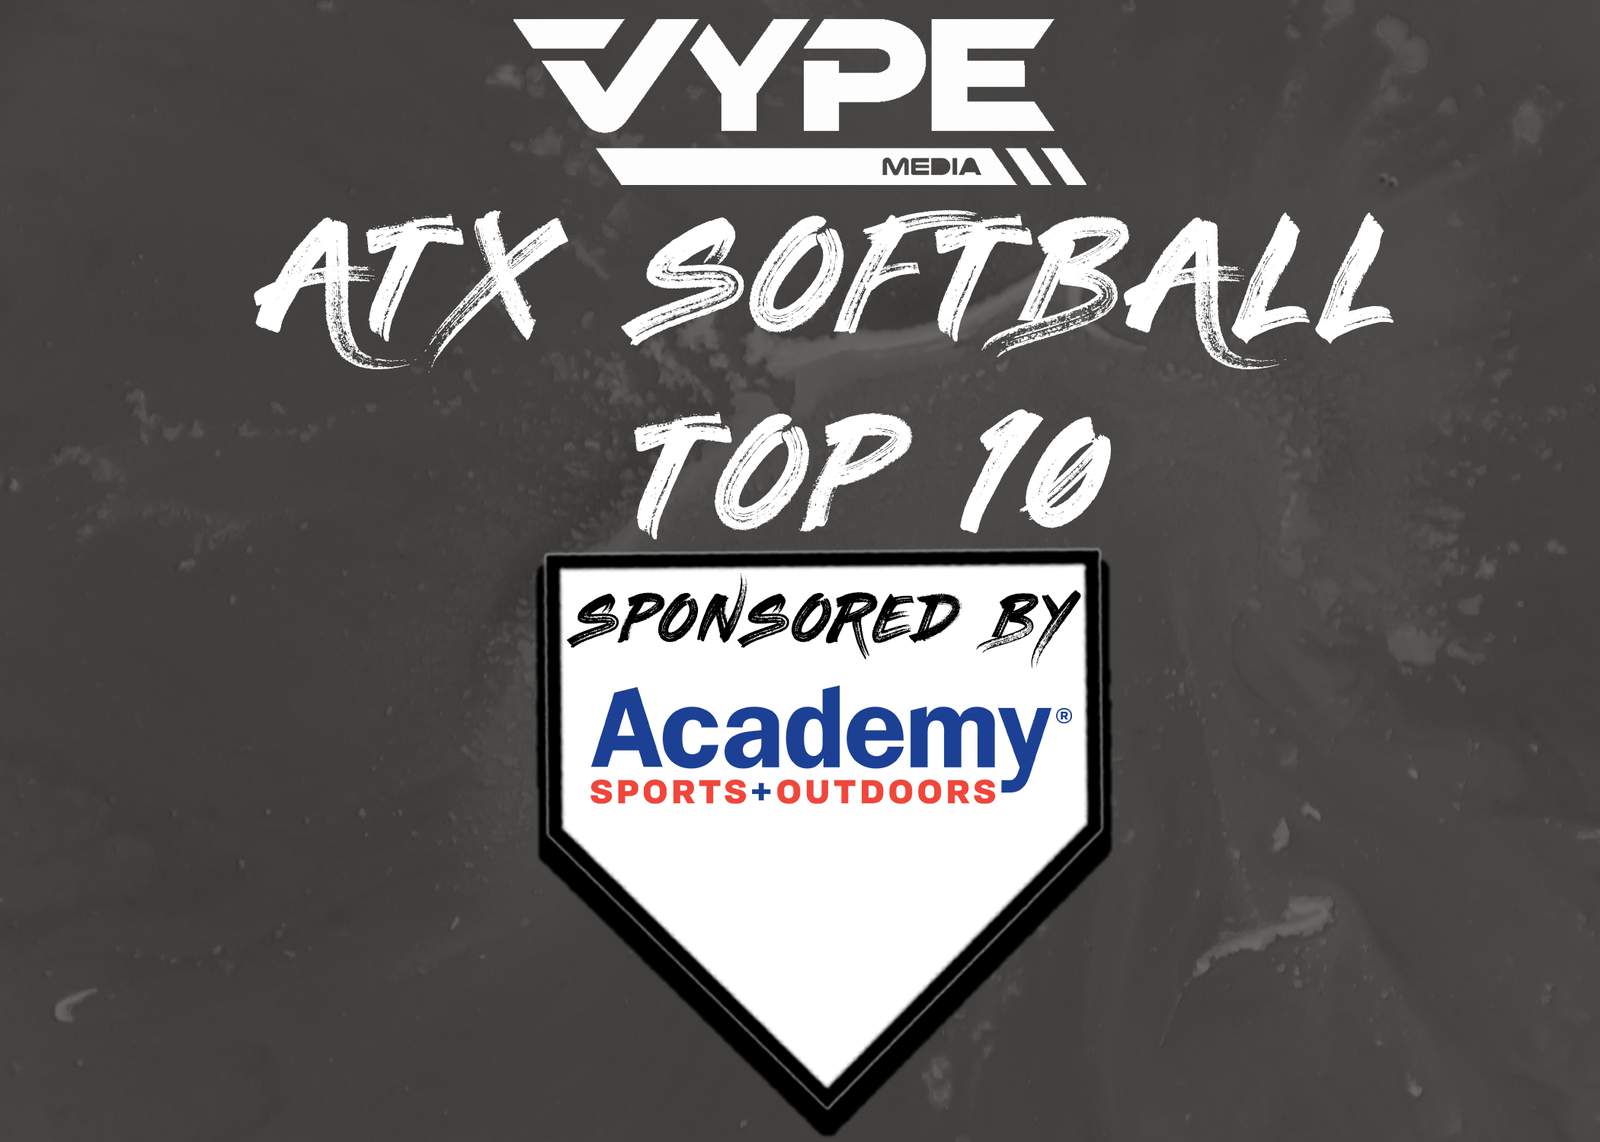 VYPE Austin Softball Rankings: Week of 4/12/21 presented by Academy Sports + Outdoors